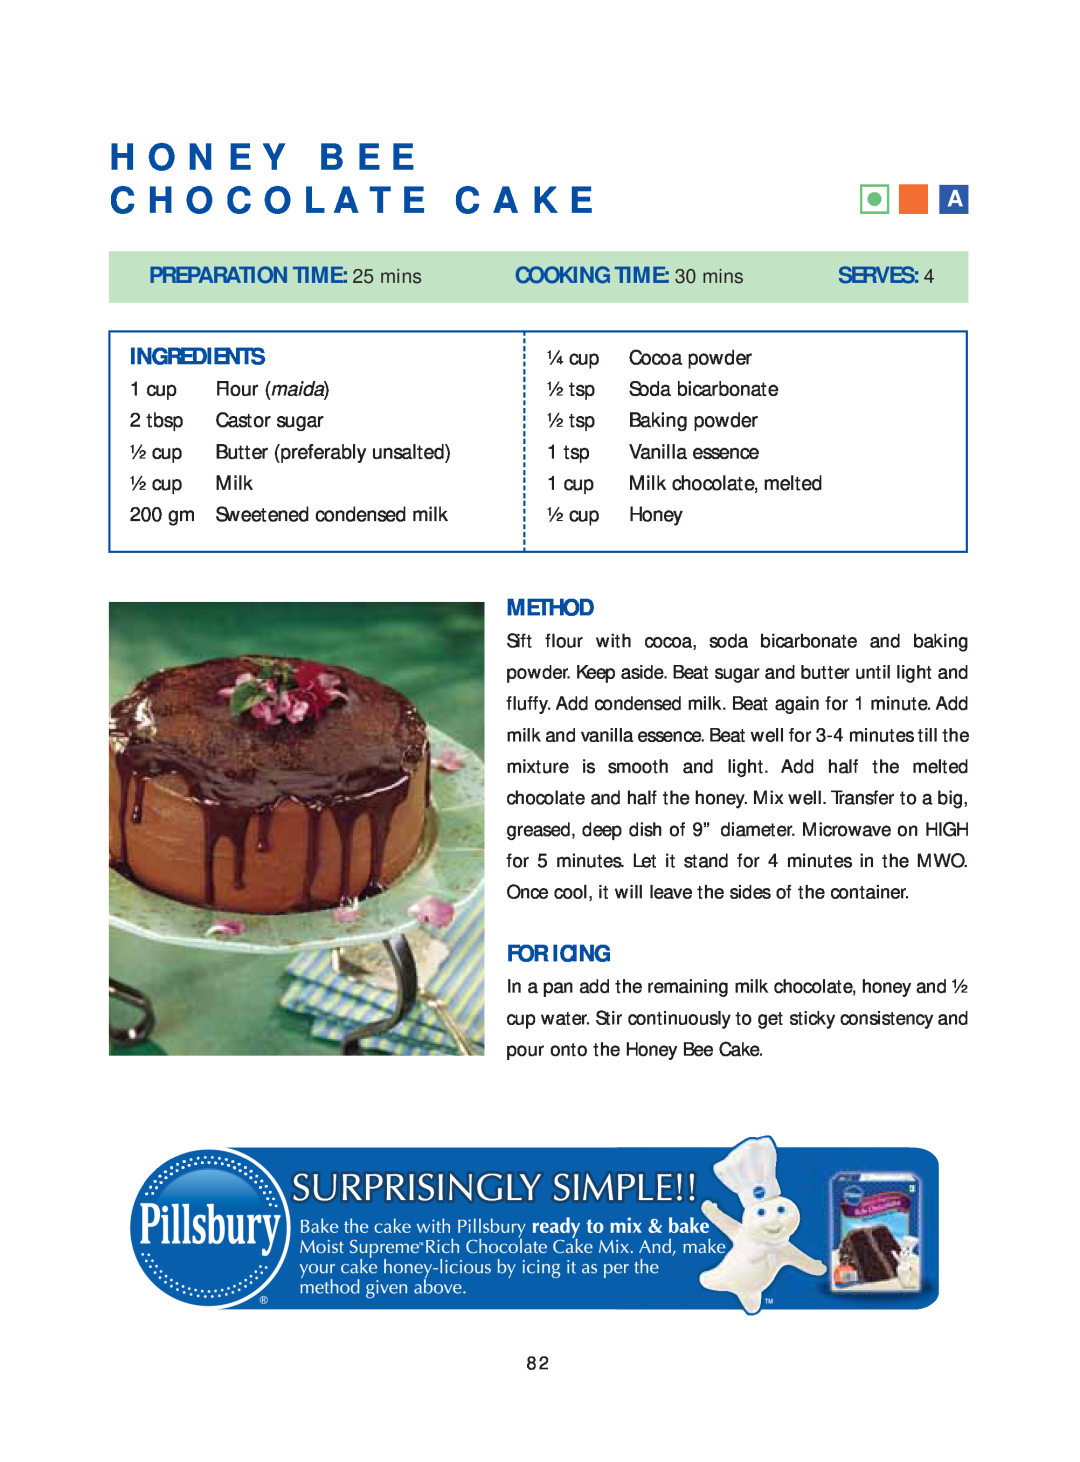 Samsung Microwave Oven Honey Bee Chocolate Cake, PREPARATION TIME: 25 mins, COOKING TIME: 30 mins, Serves, Ingredients 